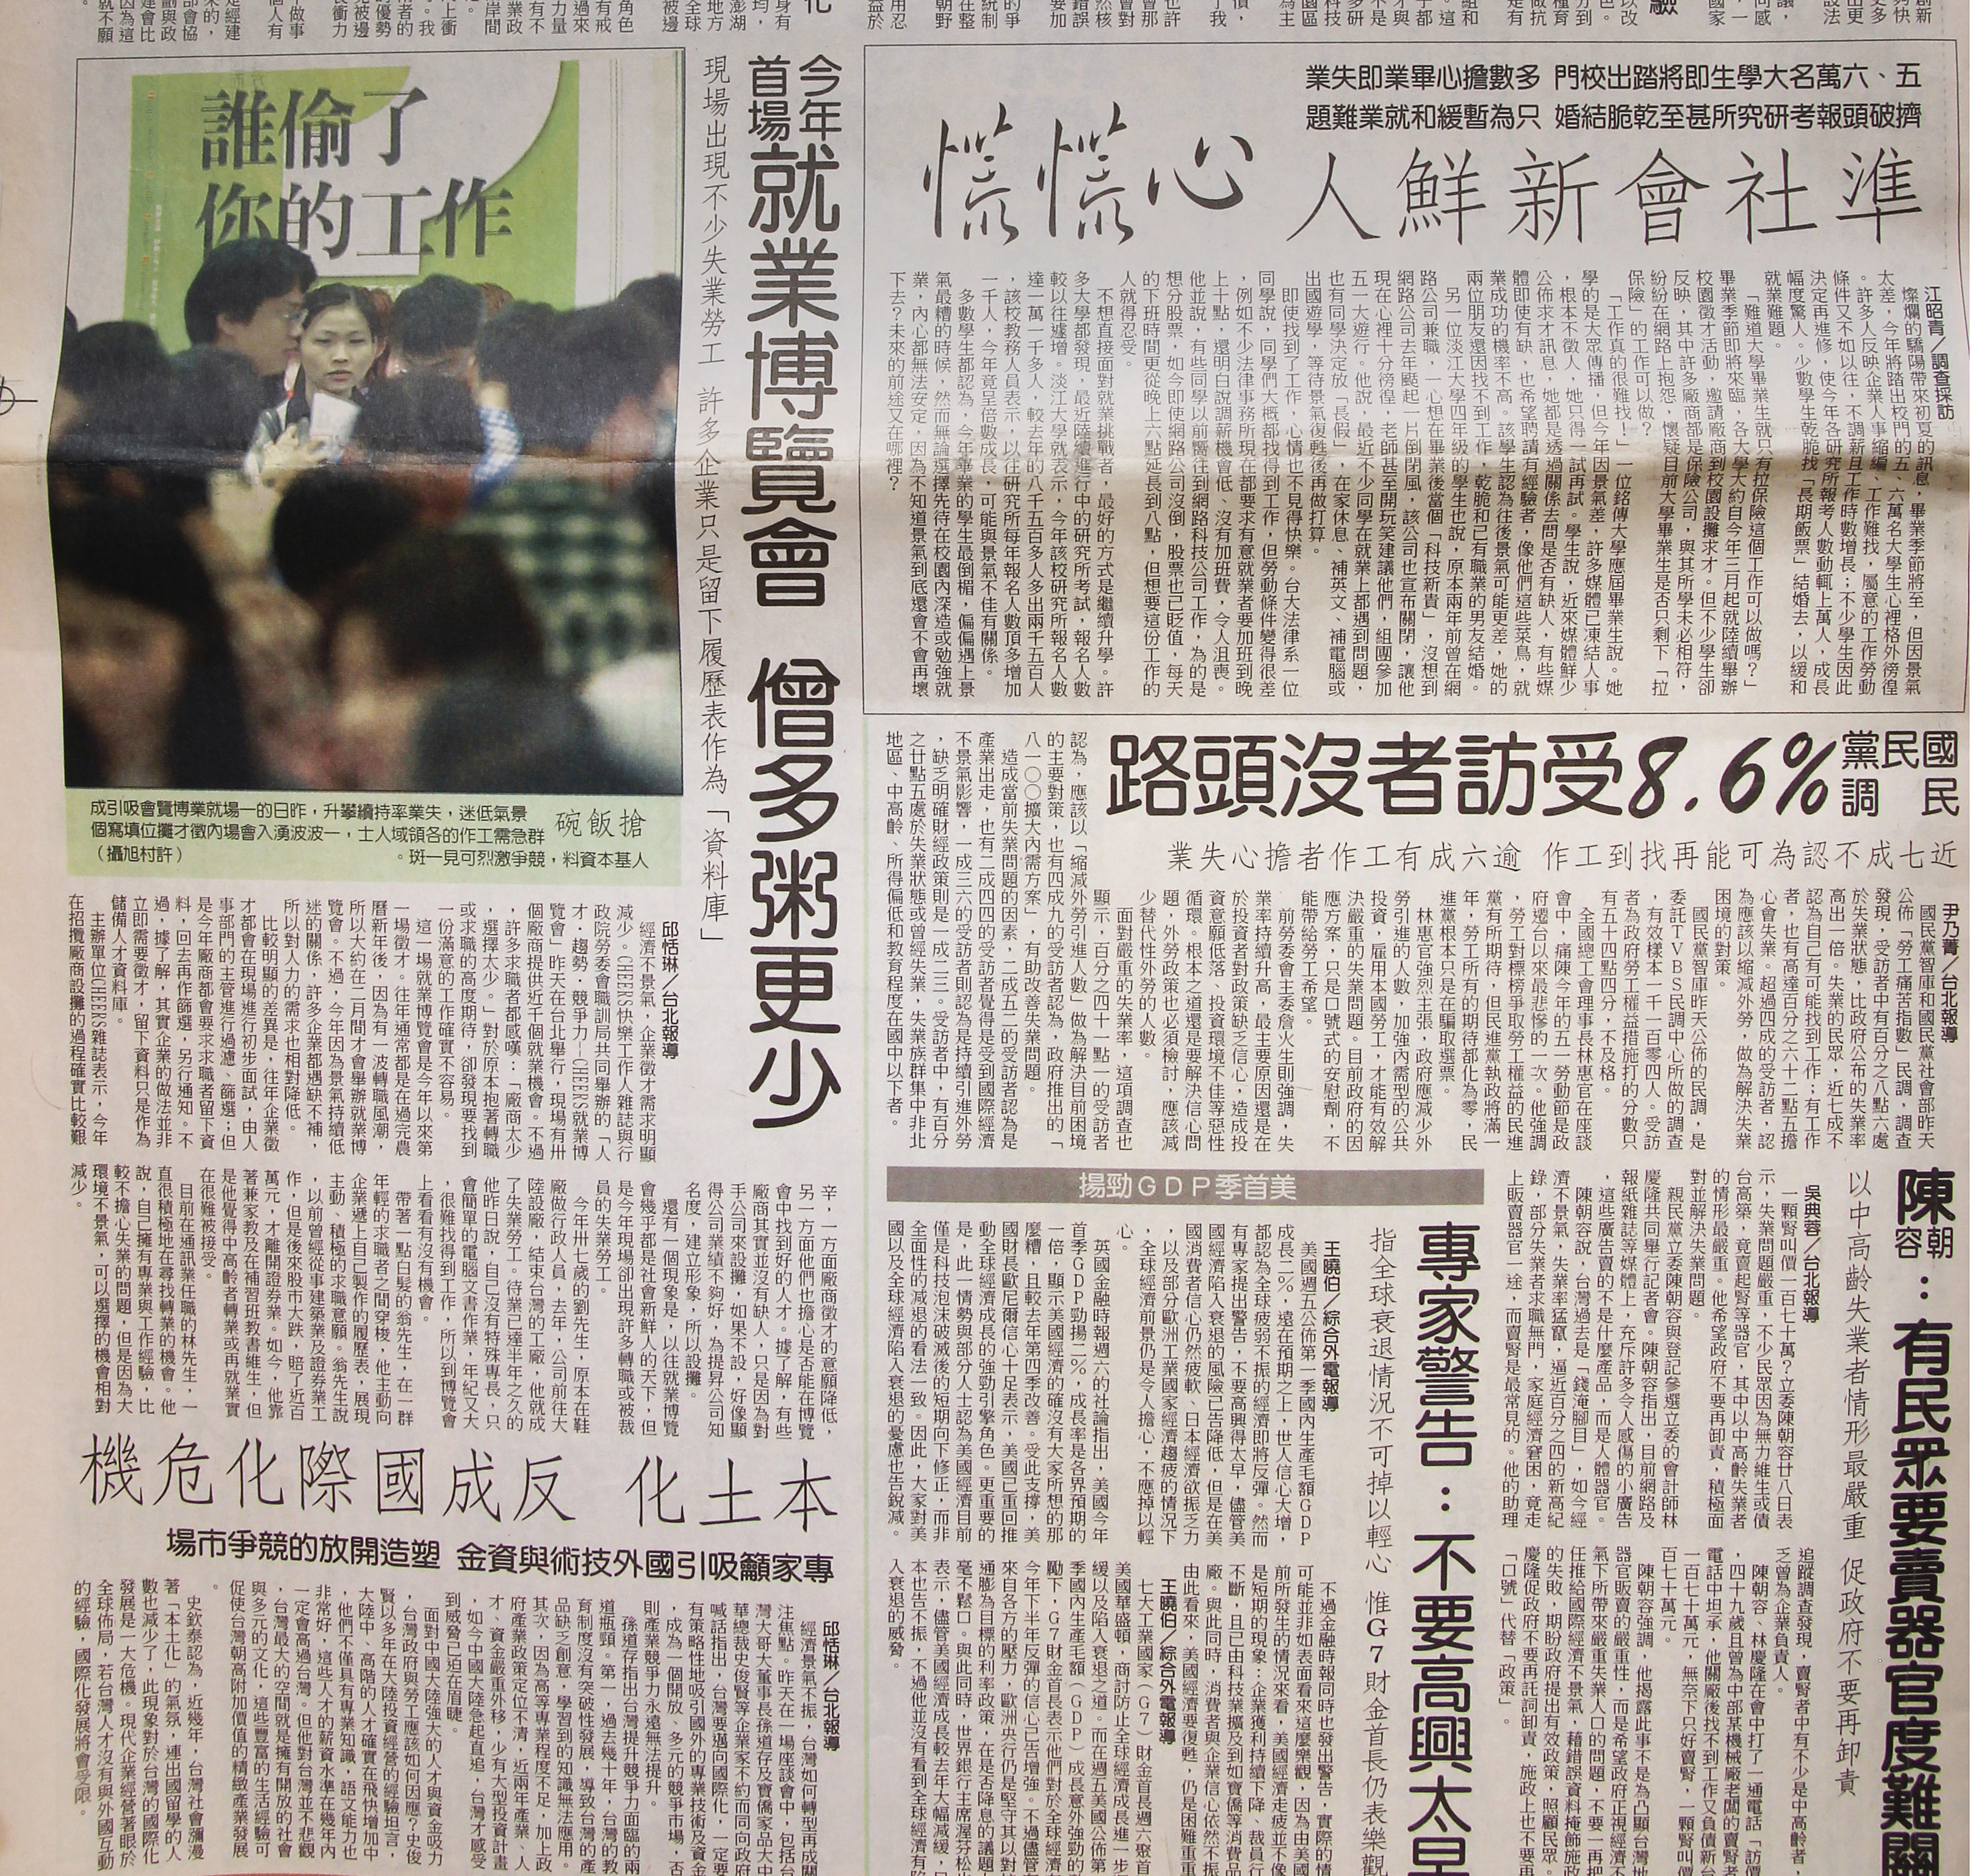 Picture of Taiwanese newspaper copy.